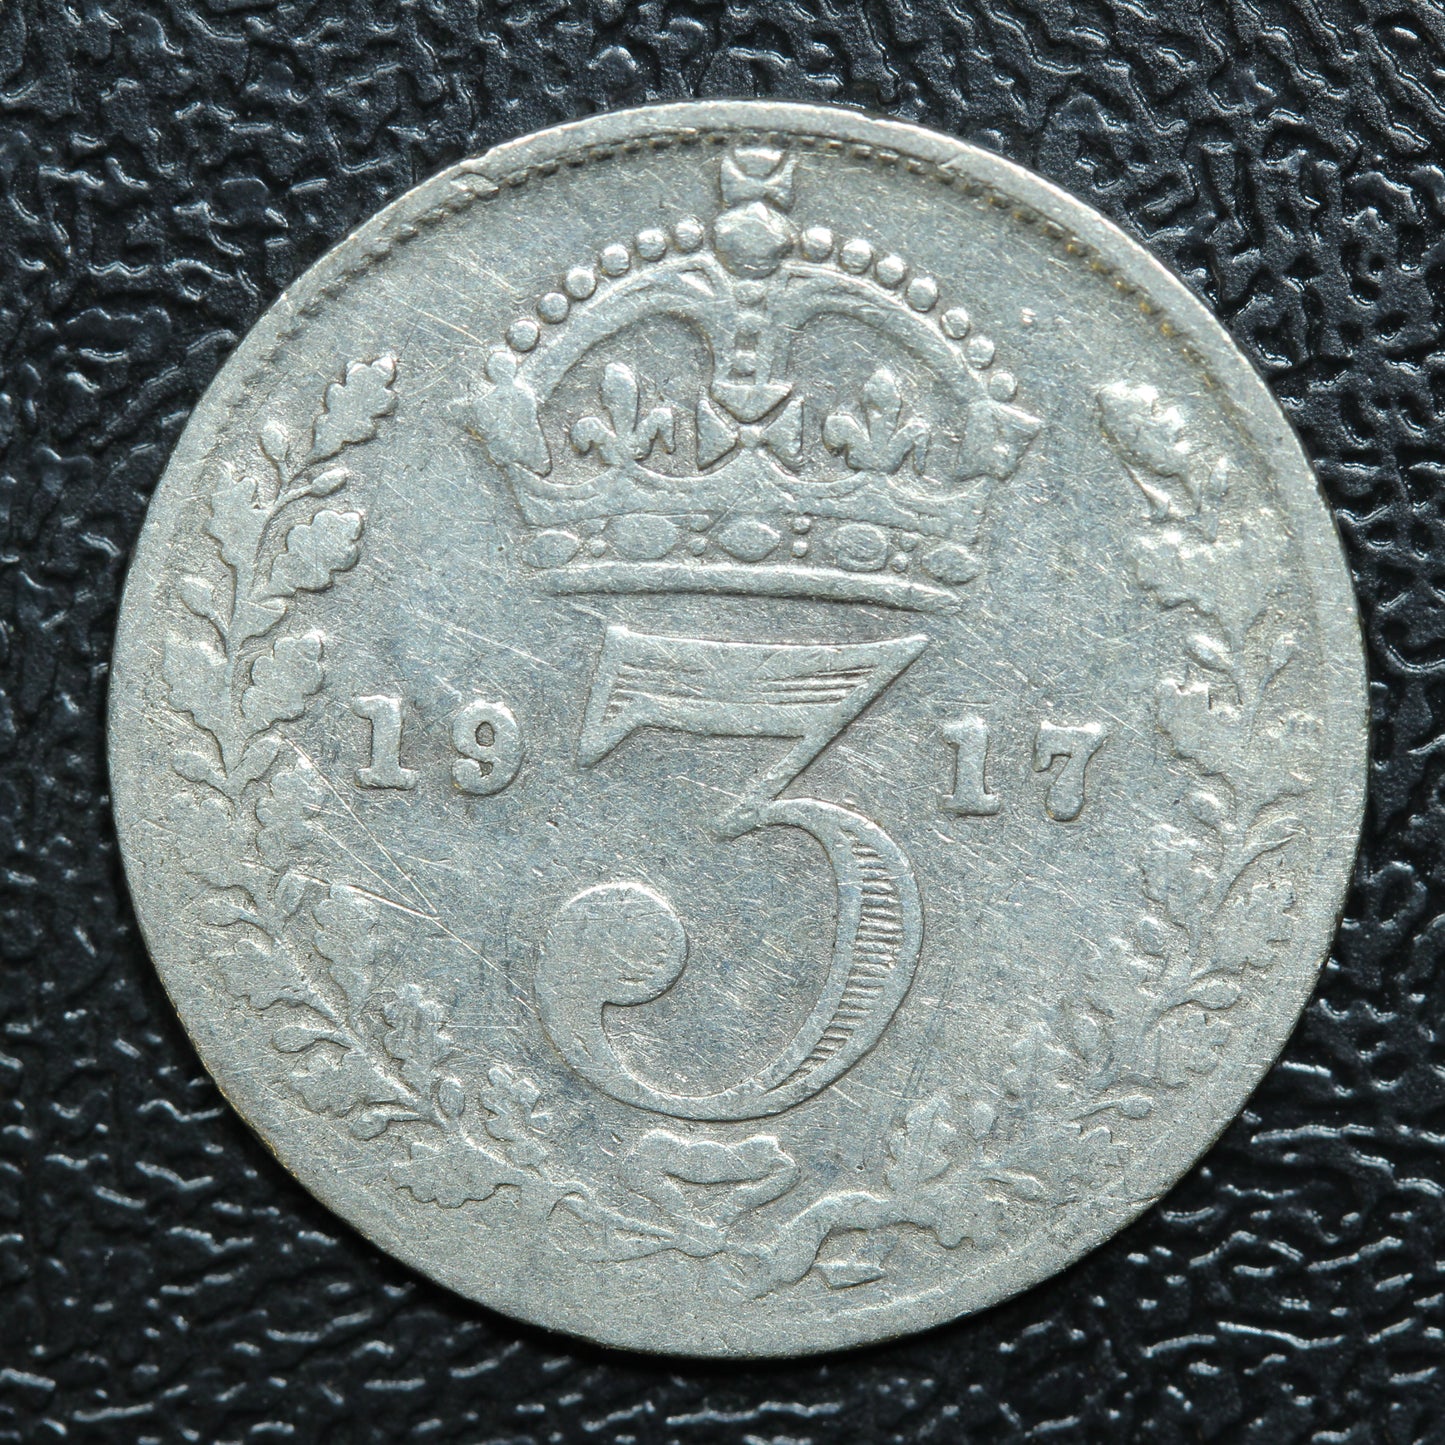 1917 Great Britain 3 Pence Threepence Silver Coin - KM# 813